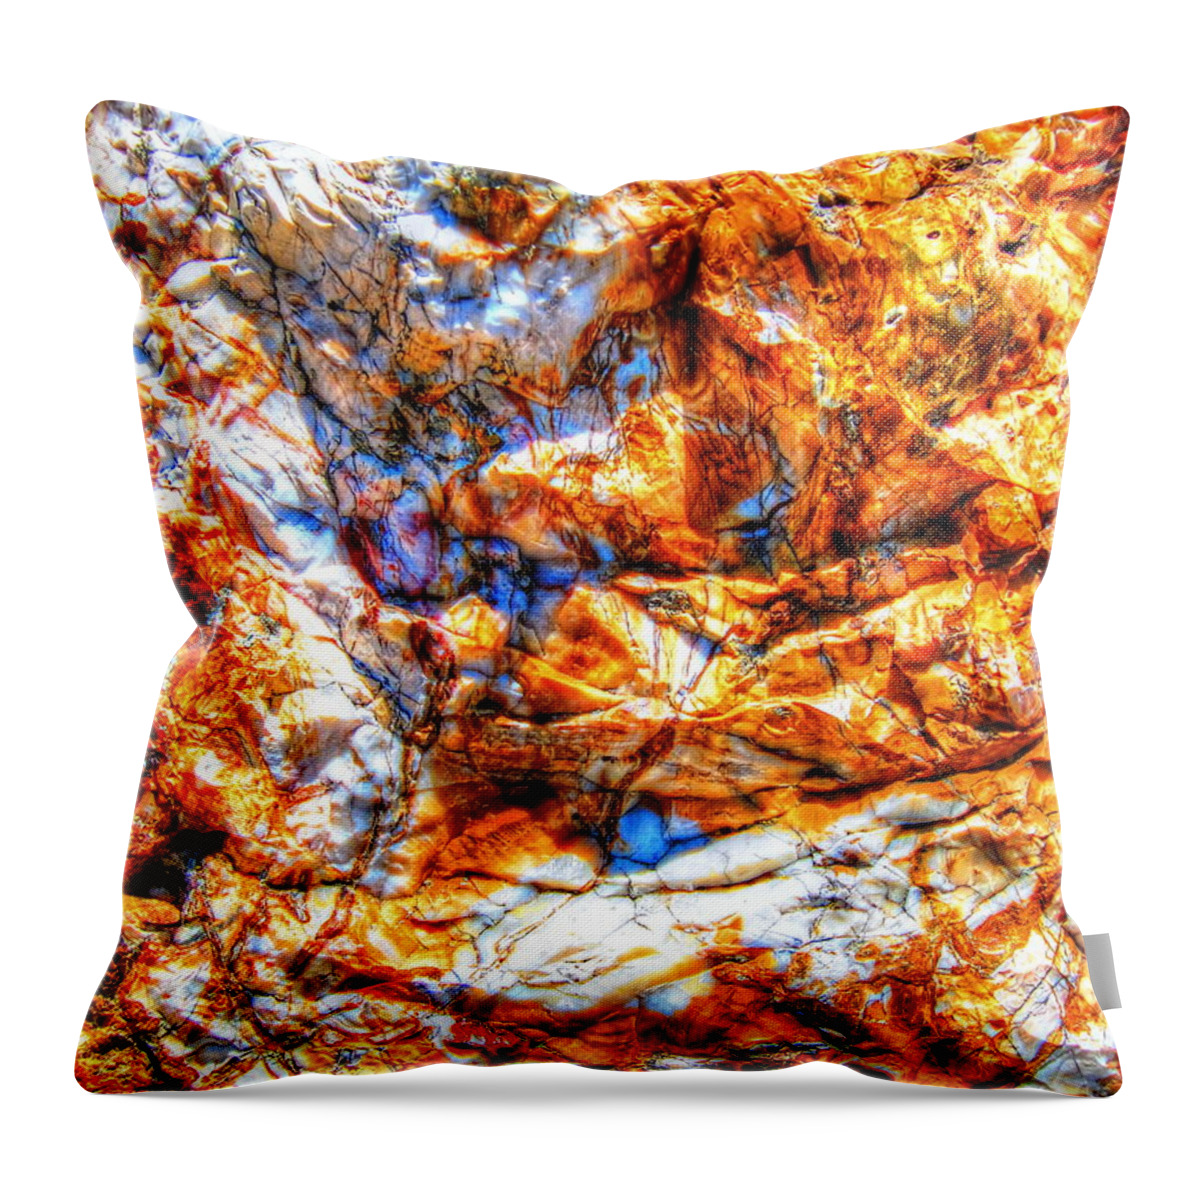 Petrified Throw Pillow featuring the photograph Petrified Abstraction No 3 by Andreas Thust